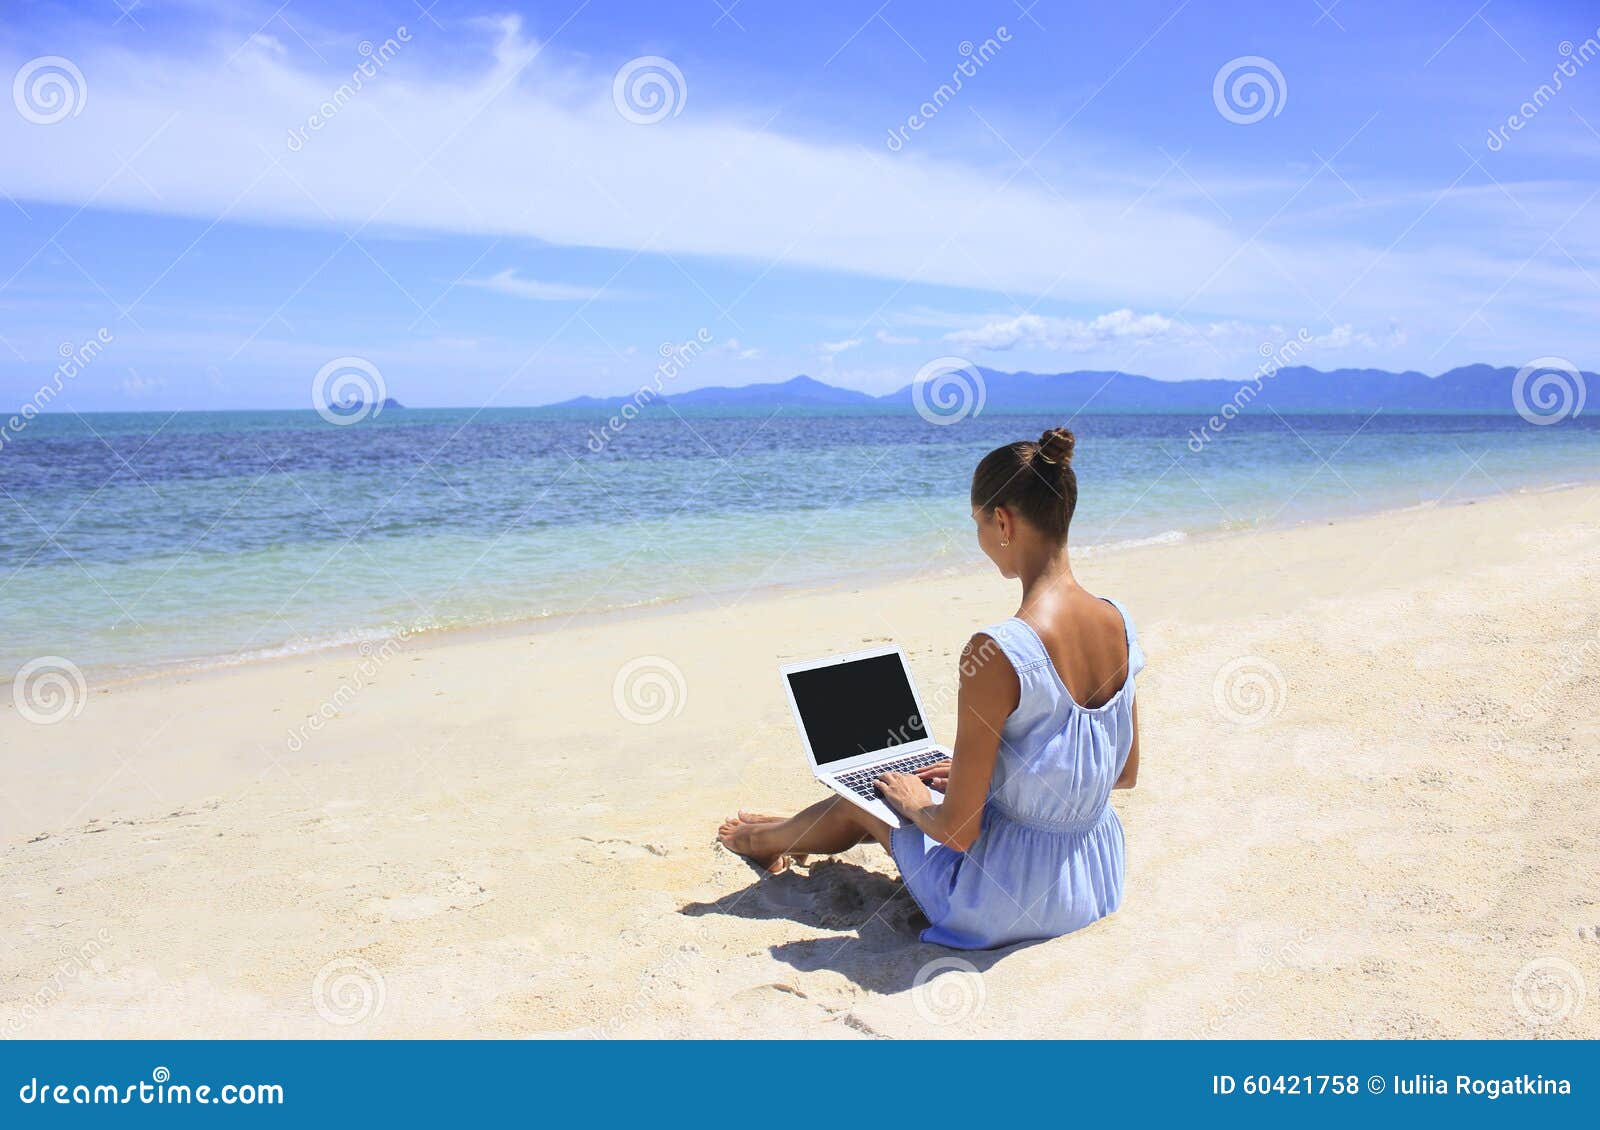 bussines woman working on the beach with a laptop